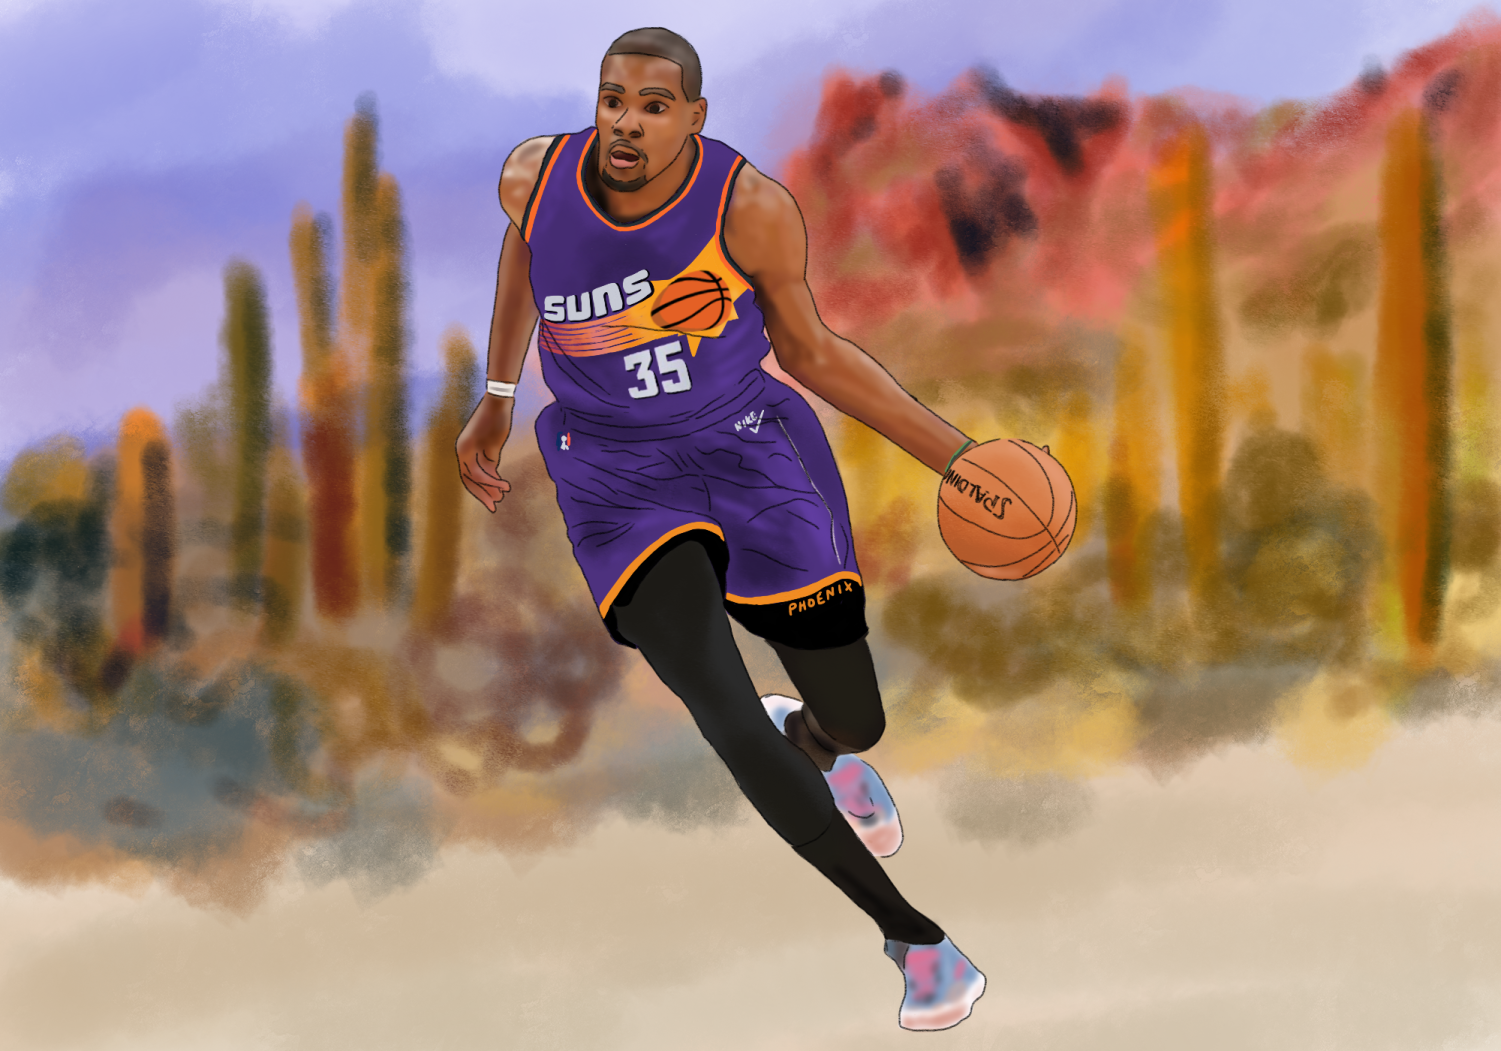 Suns acquire superstar Kevin Durant - The Ticker